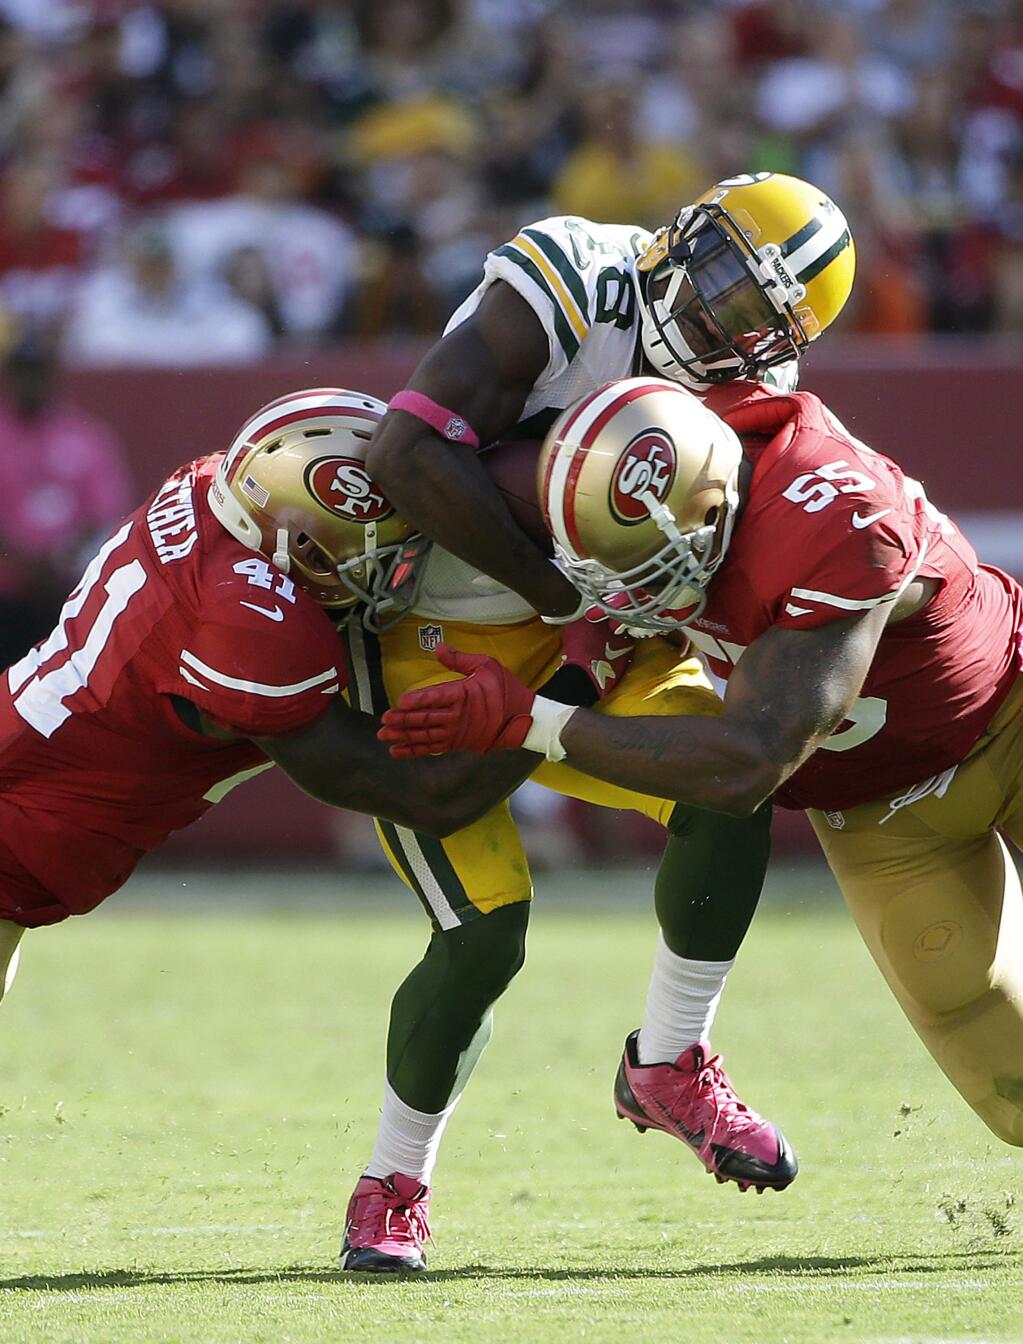 Green Bay Packers wide receiver Ty Montgomery, center, is tackled by San Francisco 49ers strong safety Antoine Bethea (41) and linebacker Ahmad Brooks (55) Sunday, Oct. 4, 2015. (AP Photo/Marcio Jose Sanchez)